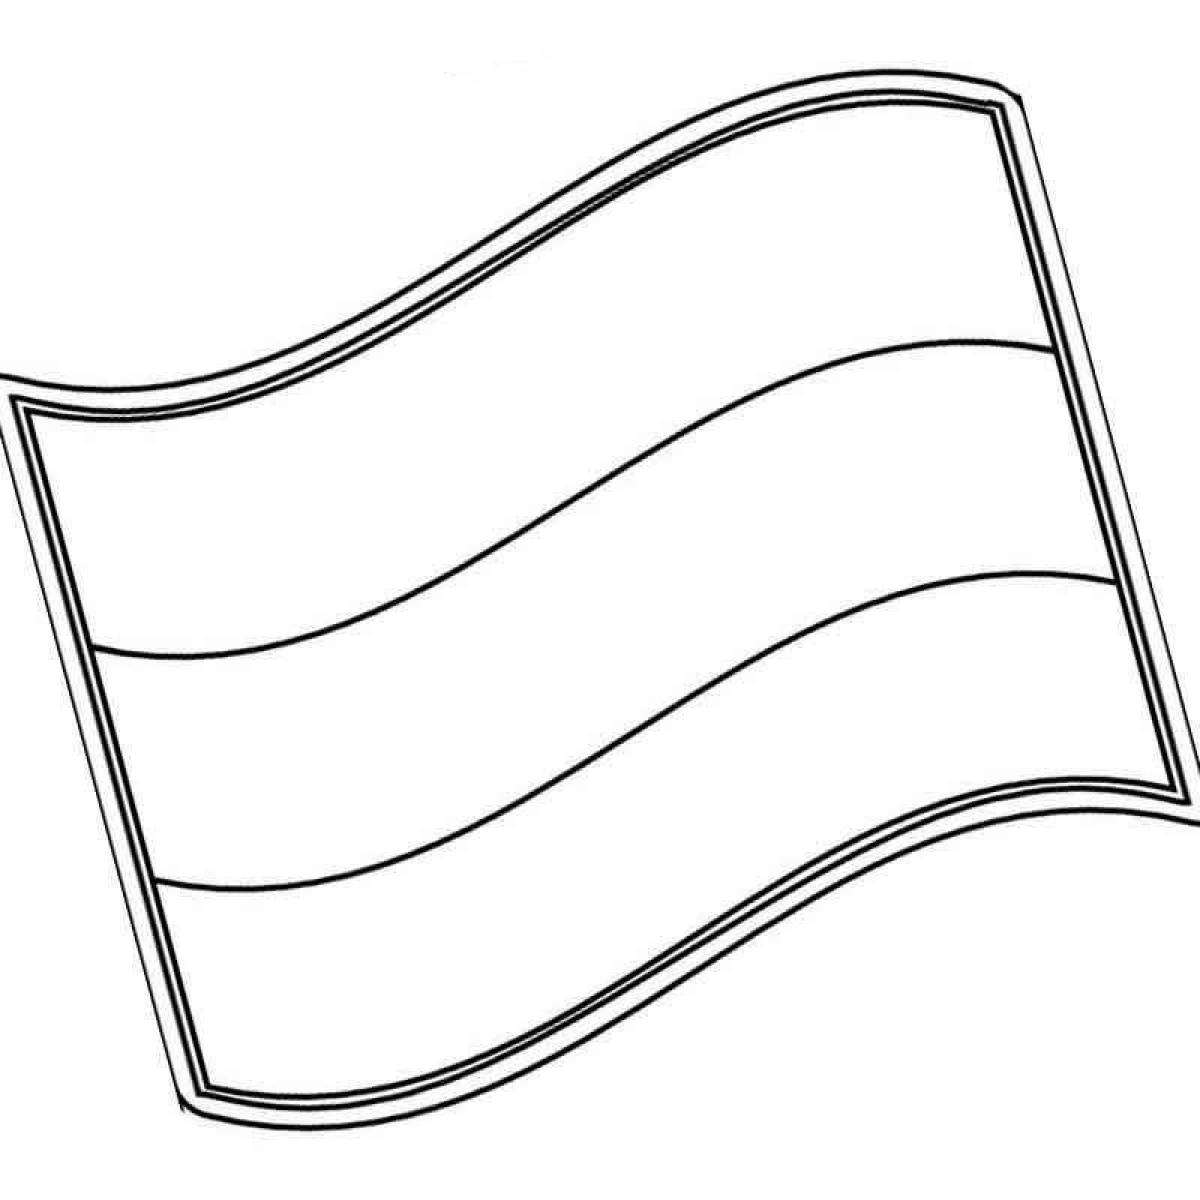 Coloring book shining flag for kids